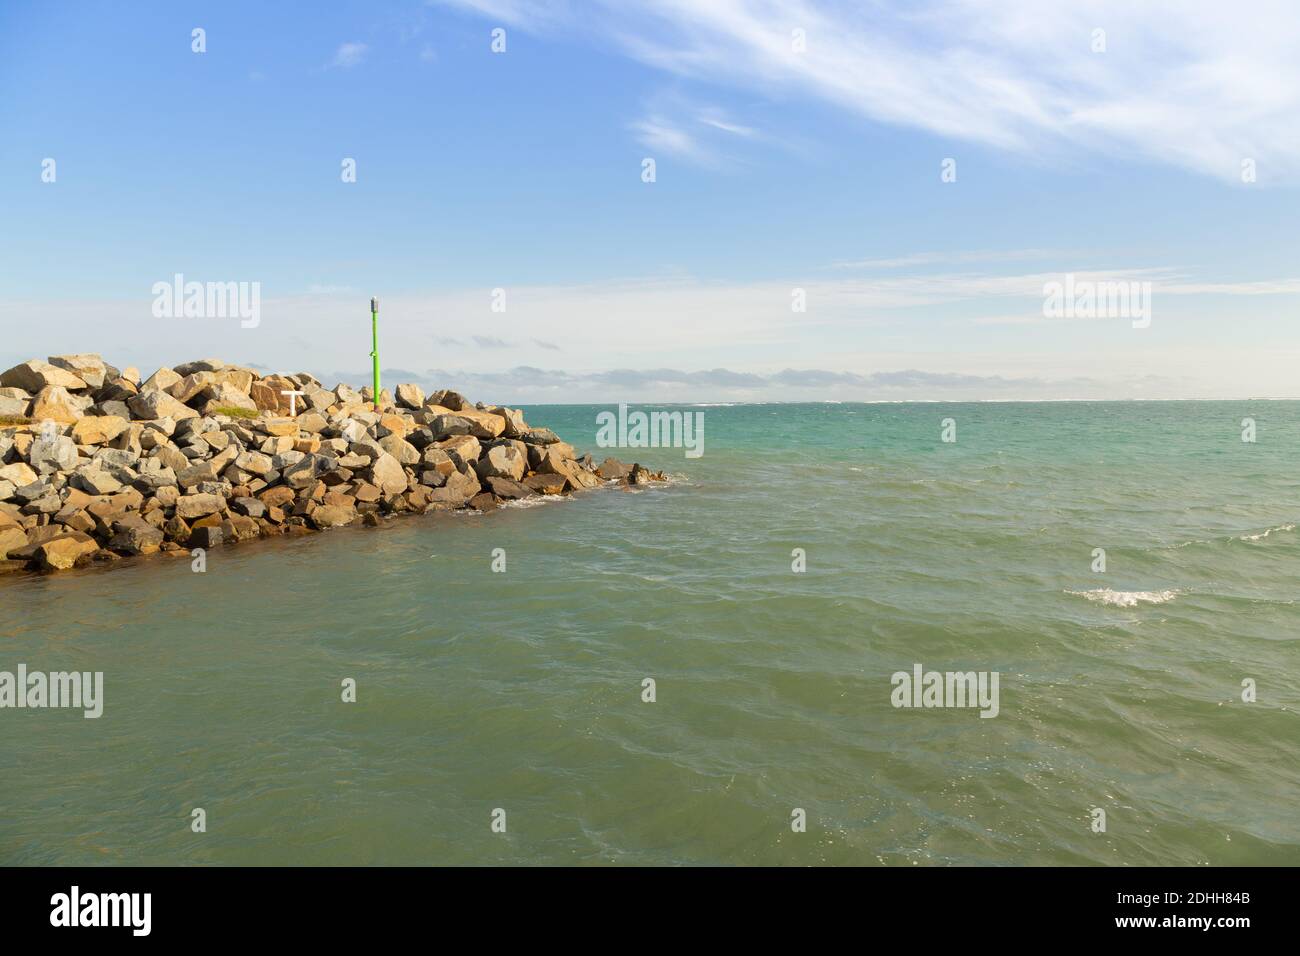 The indian ocean seen from the Harbour of Hopetoun in Western Australia Stock Photo